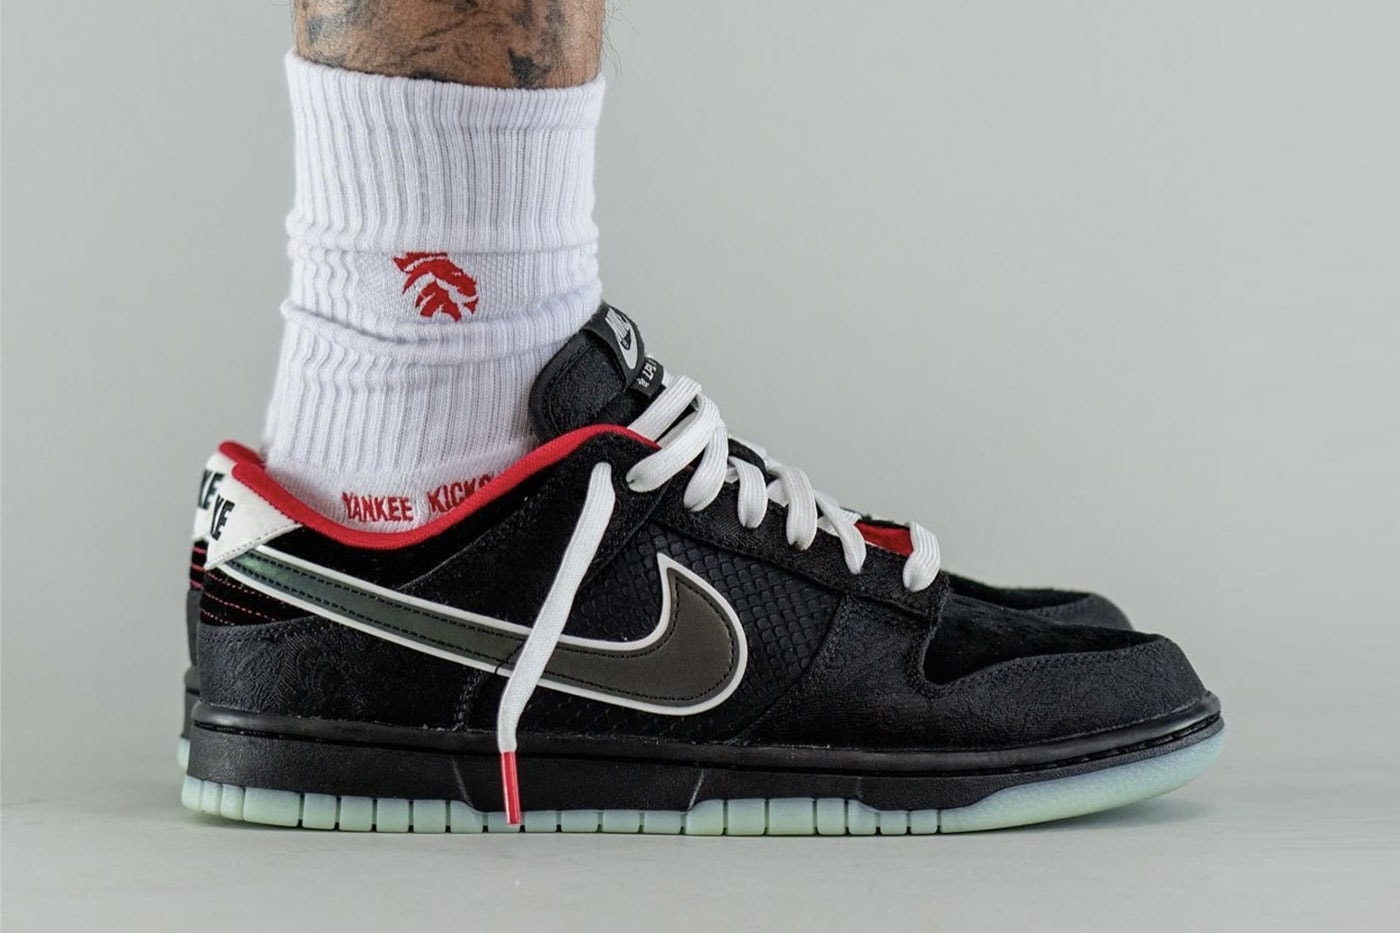 League of Legends Pro League and Nike Link Up on New Dunks